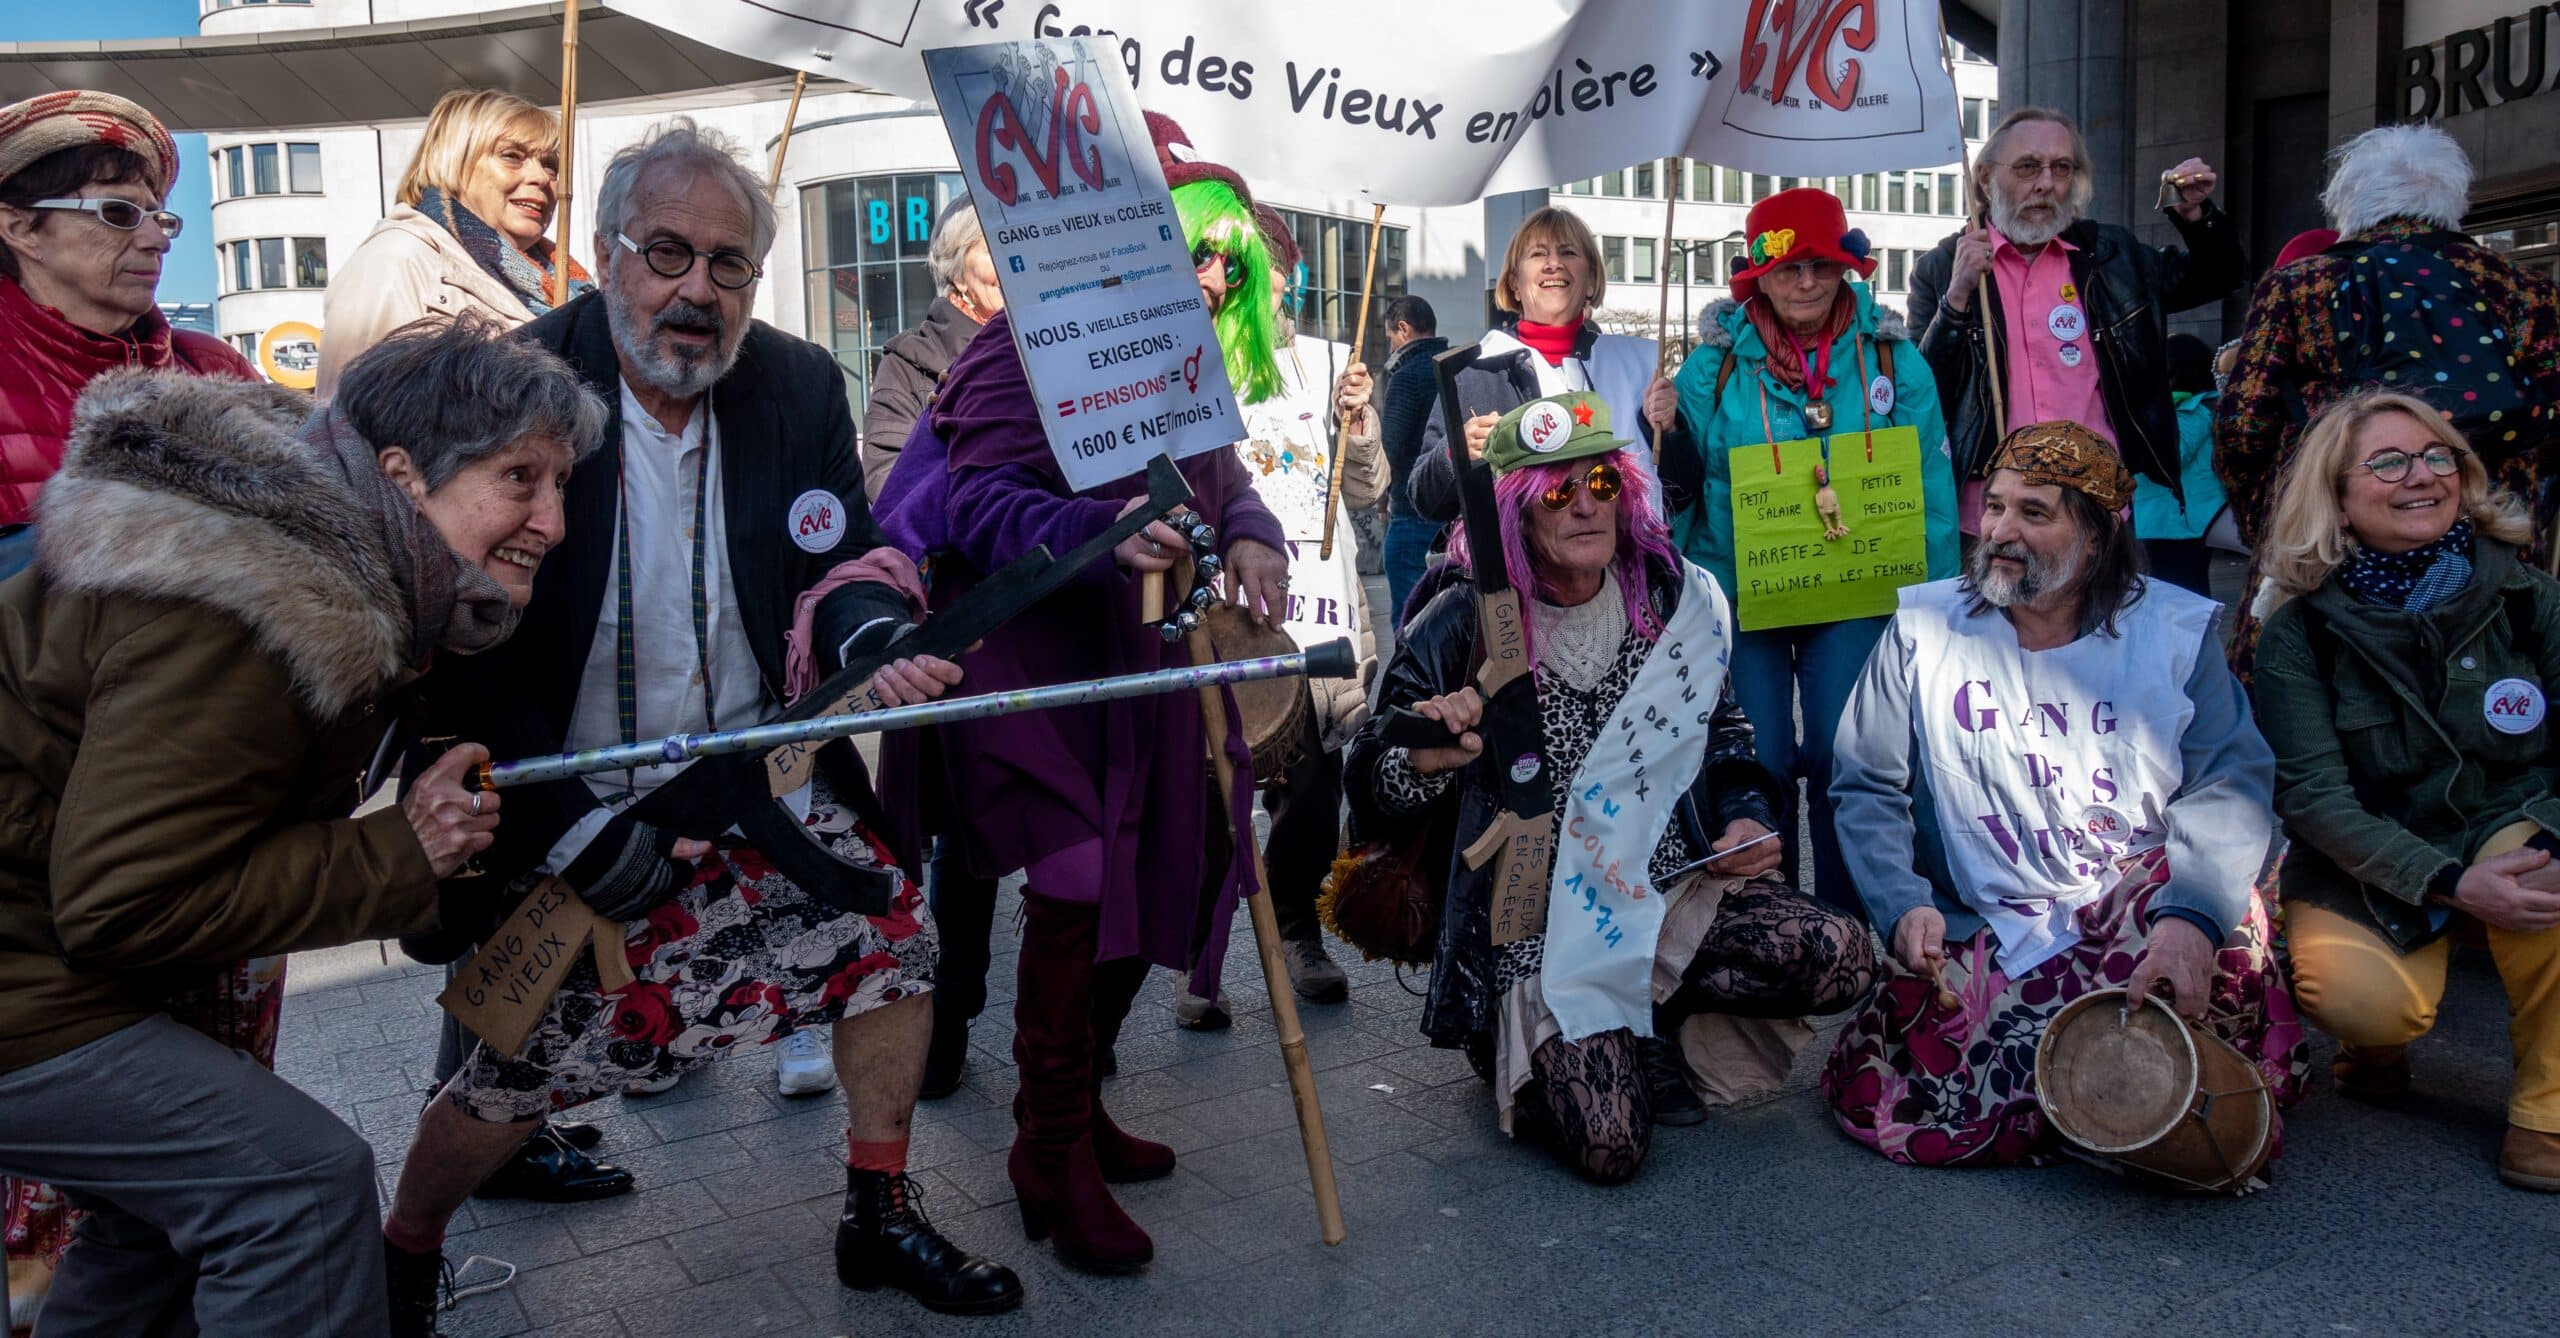 Gang des Vieux en Colère participating in the 8th March protest in Brussels